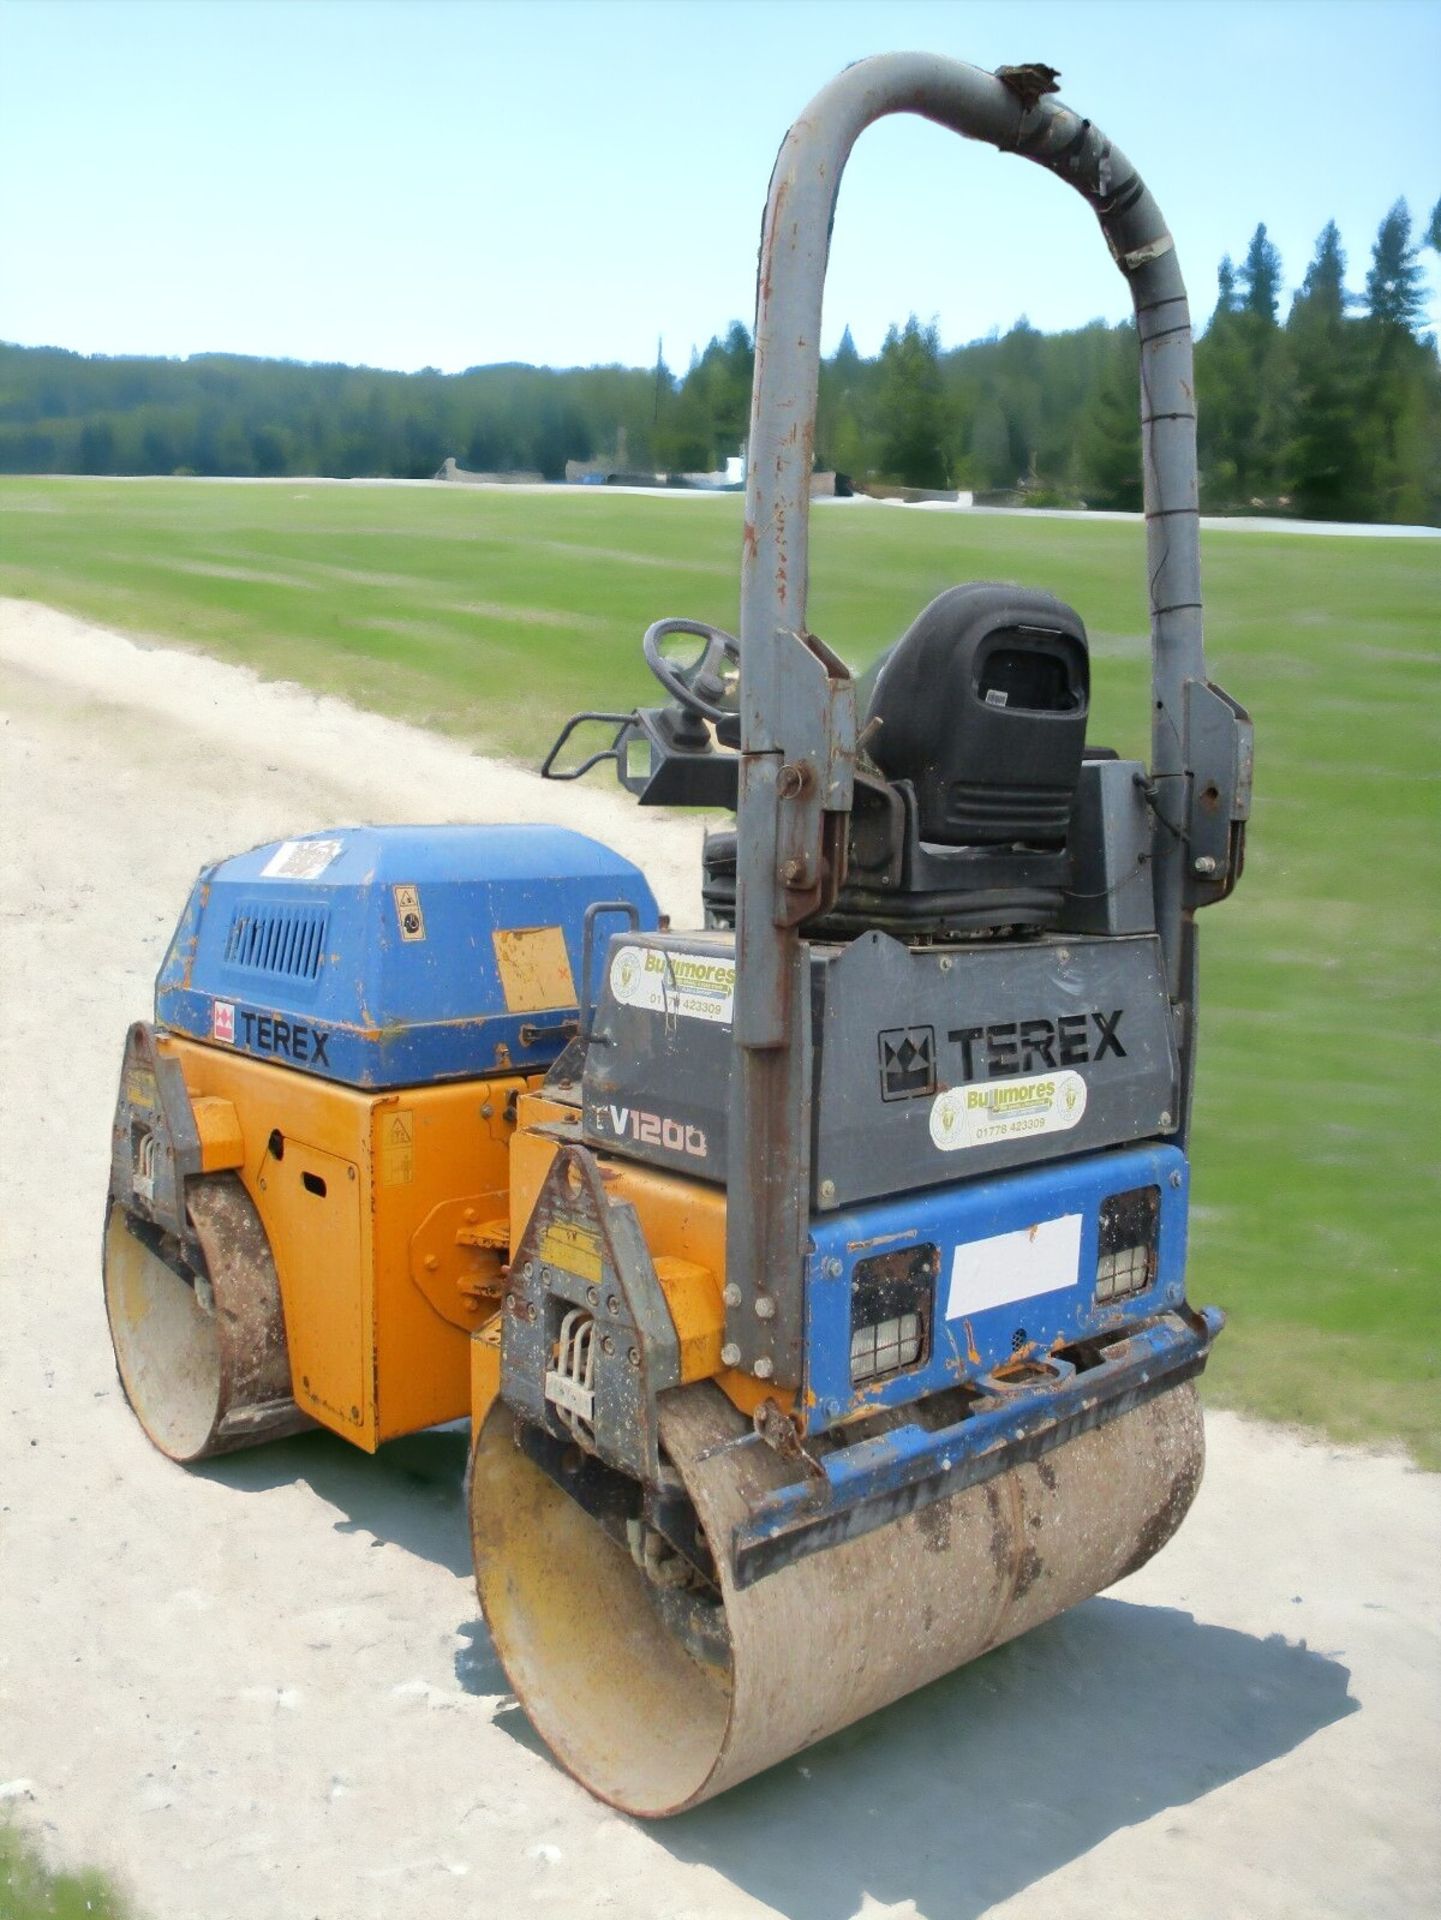 ACHIEVE SMOOTH AND UNIFORM COMPACTION WITH THE TEREX TV1200 ROLLER - Image 4 of 10